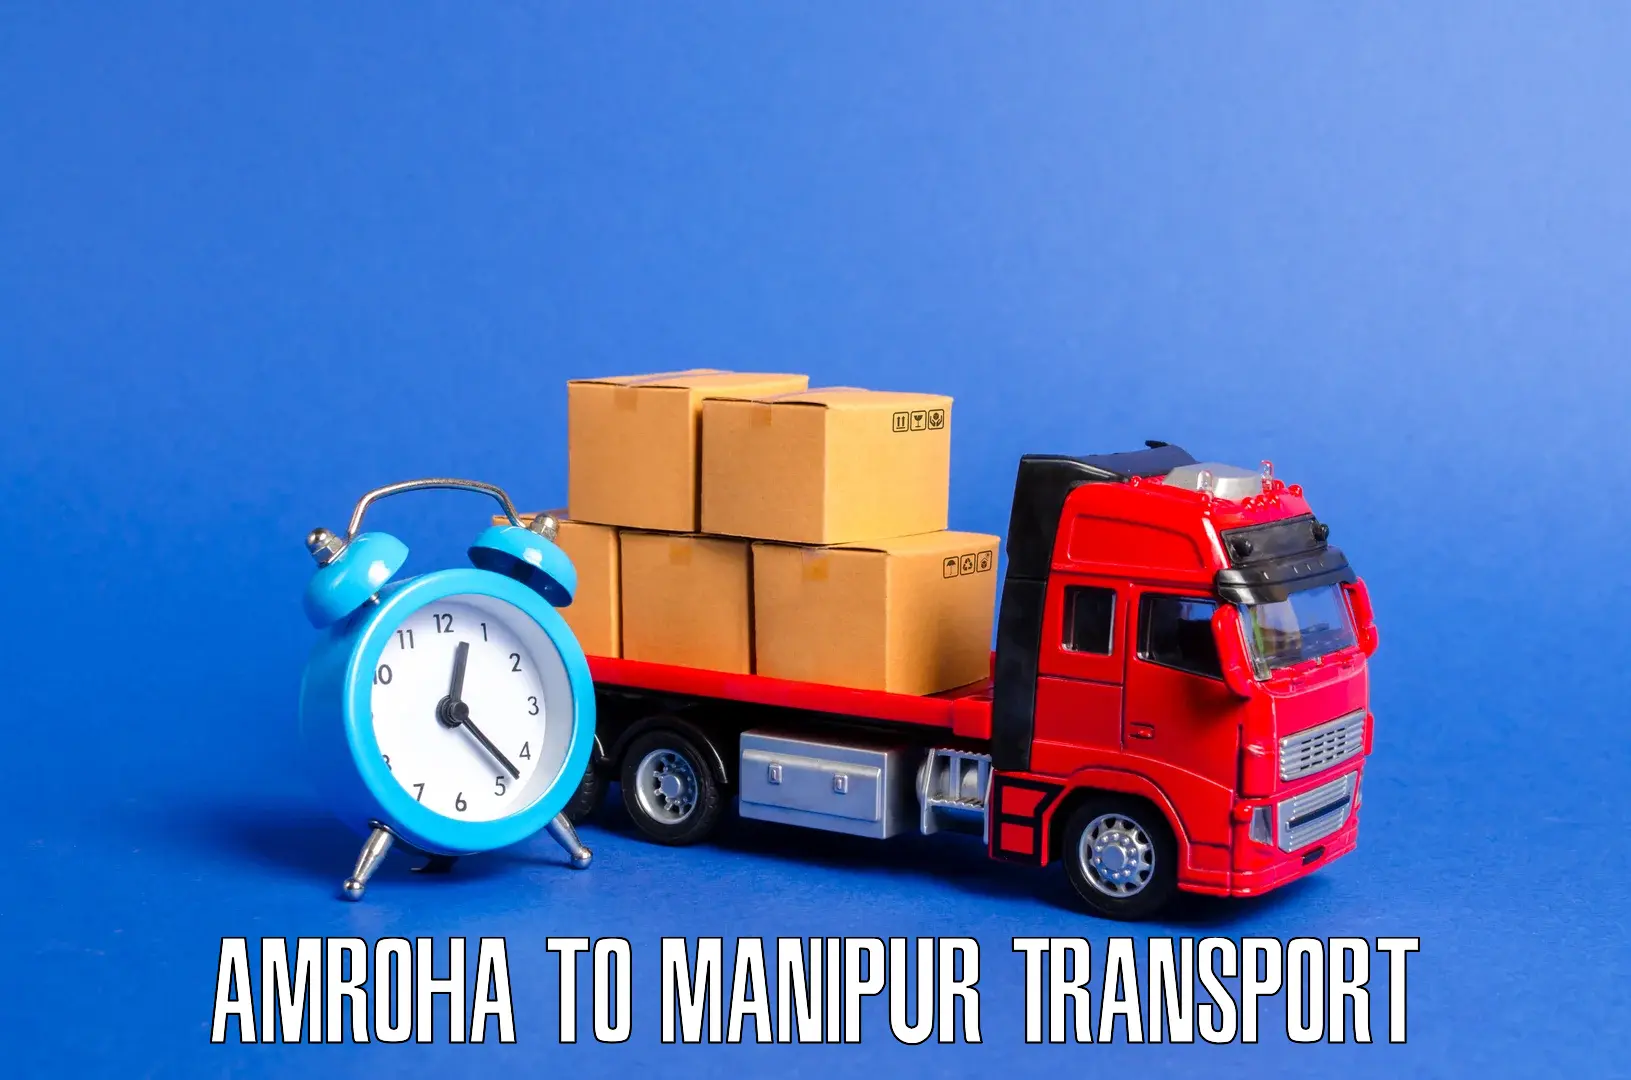 Nearby transport service Amroha to Imphal